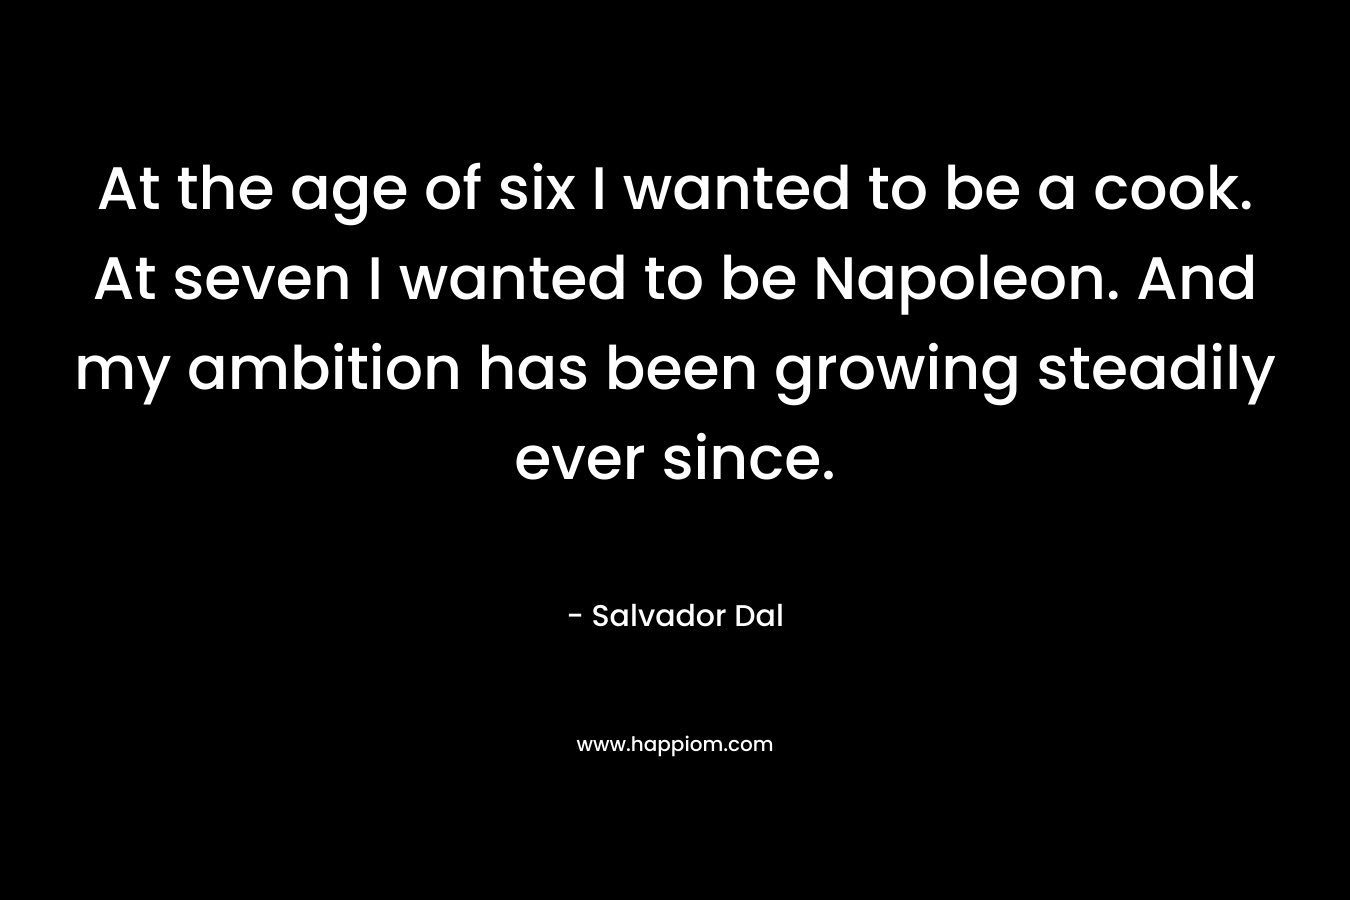 At the age of six I wanted to be a cook. At seven I wanted to be Napoleon. And my ambition has been growing steadily ever since. – Salvador Dal